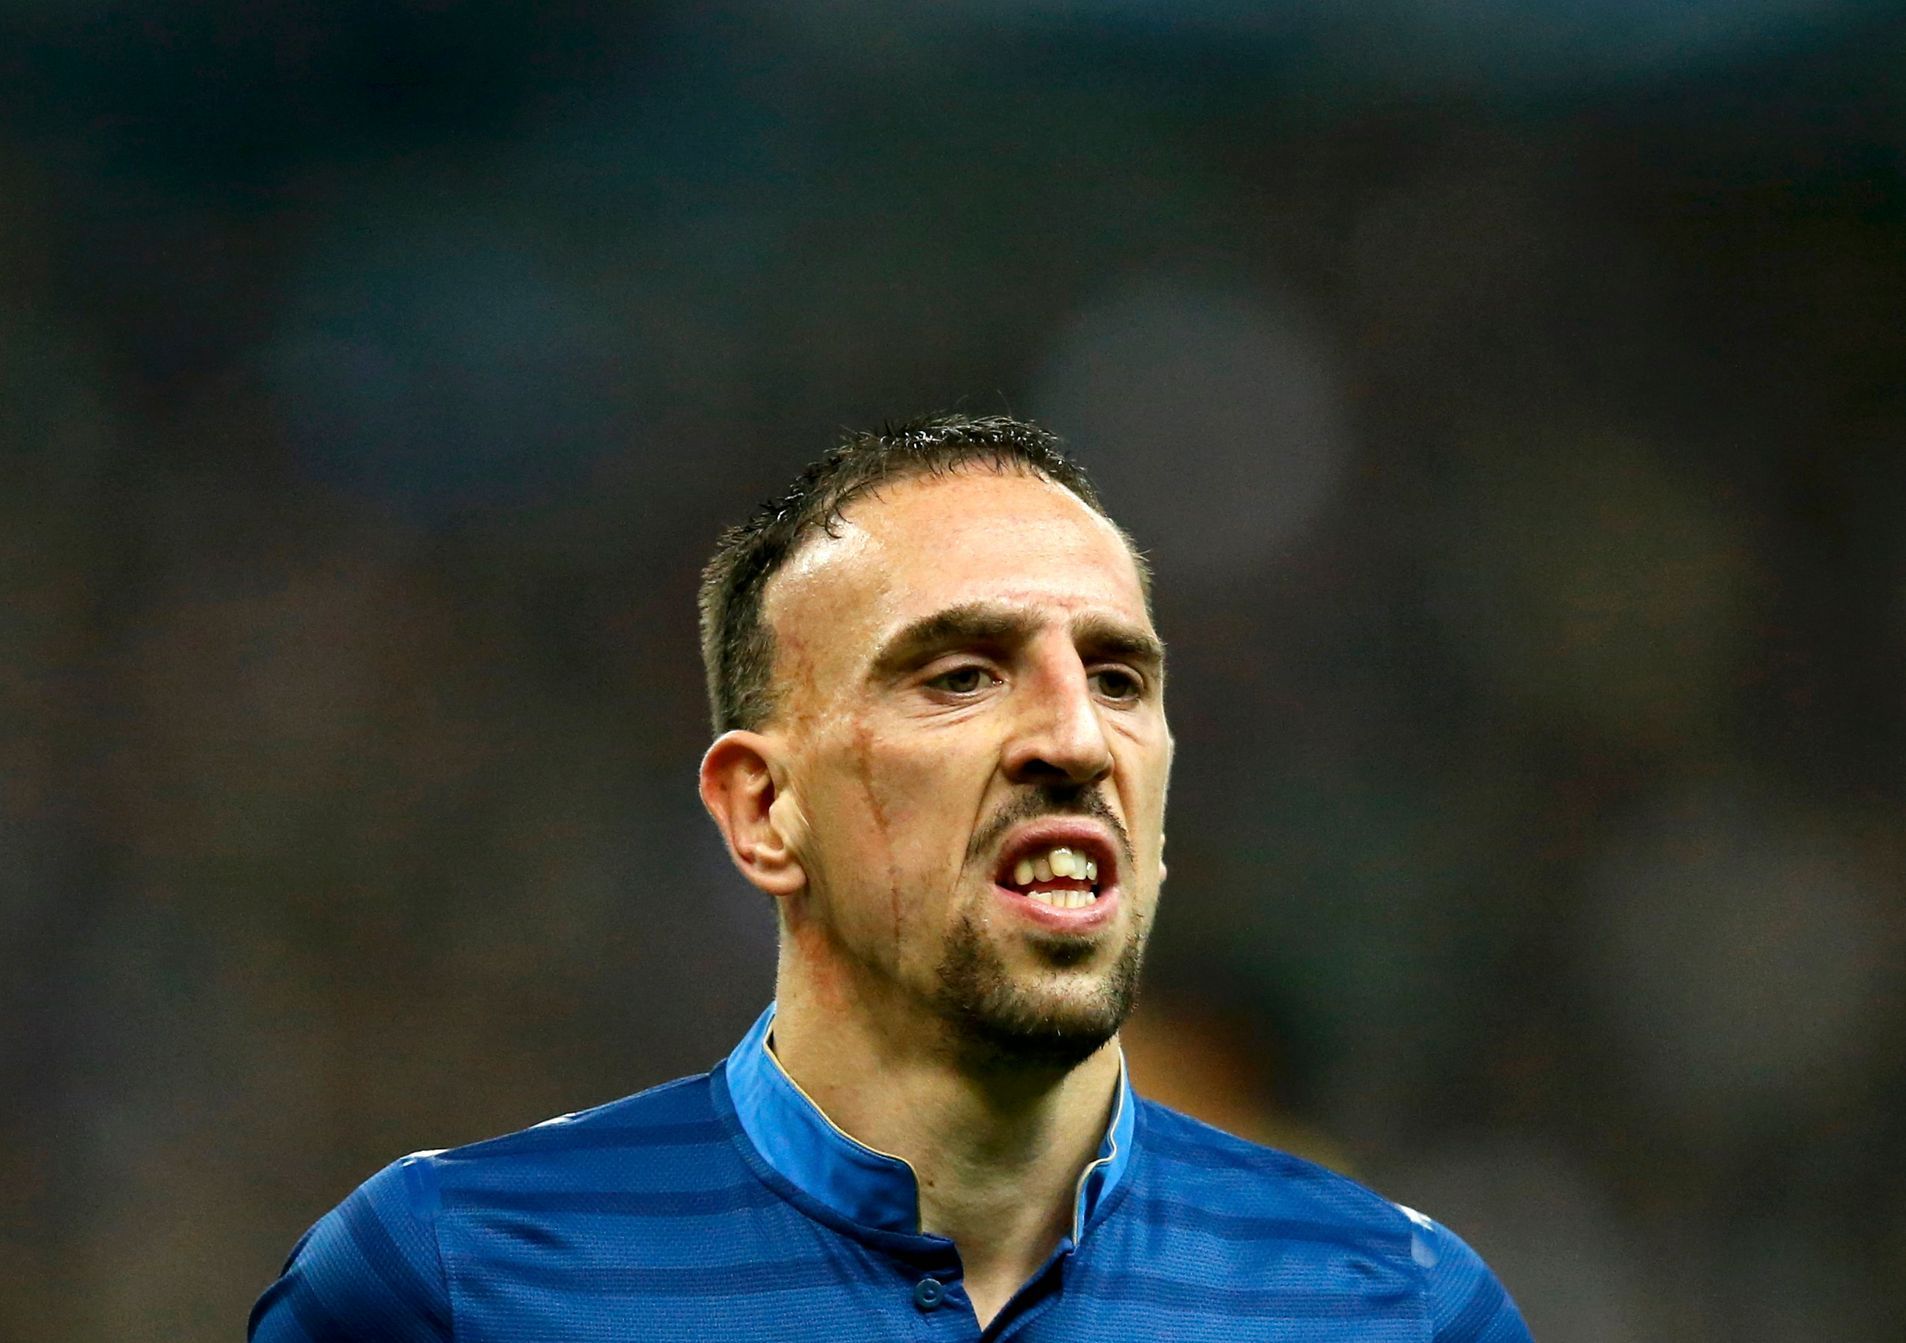 France's Franck Ribery reacts during the 2014 World Cup qualifying soccer match against Finland at the Stade de France stadium in Saint-Denis, near Paris